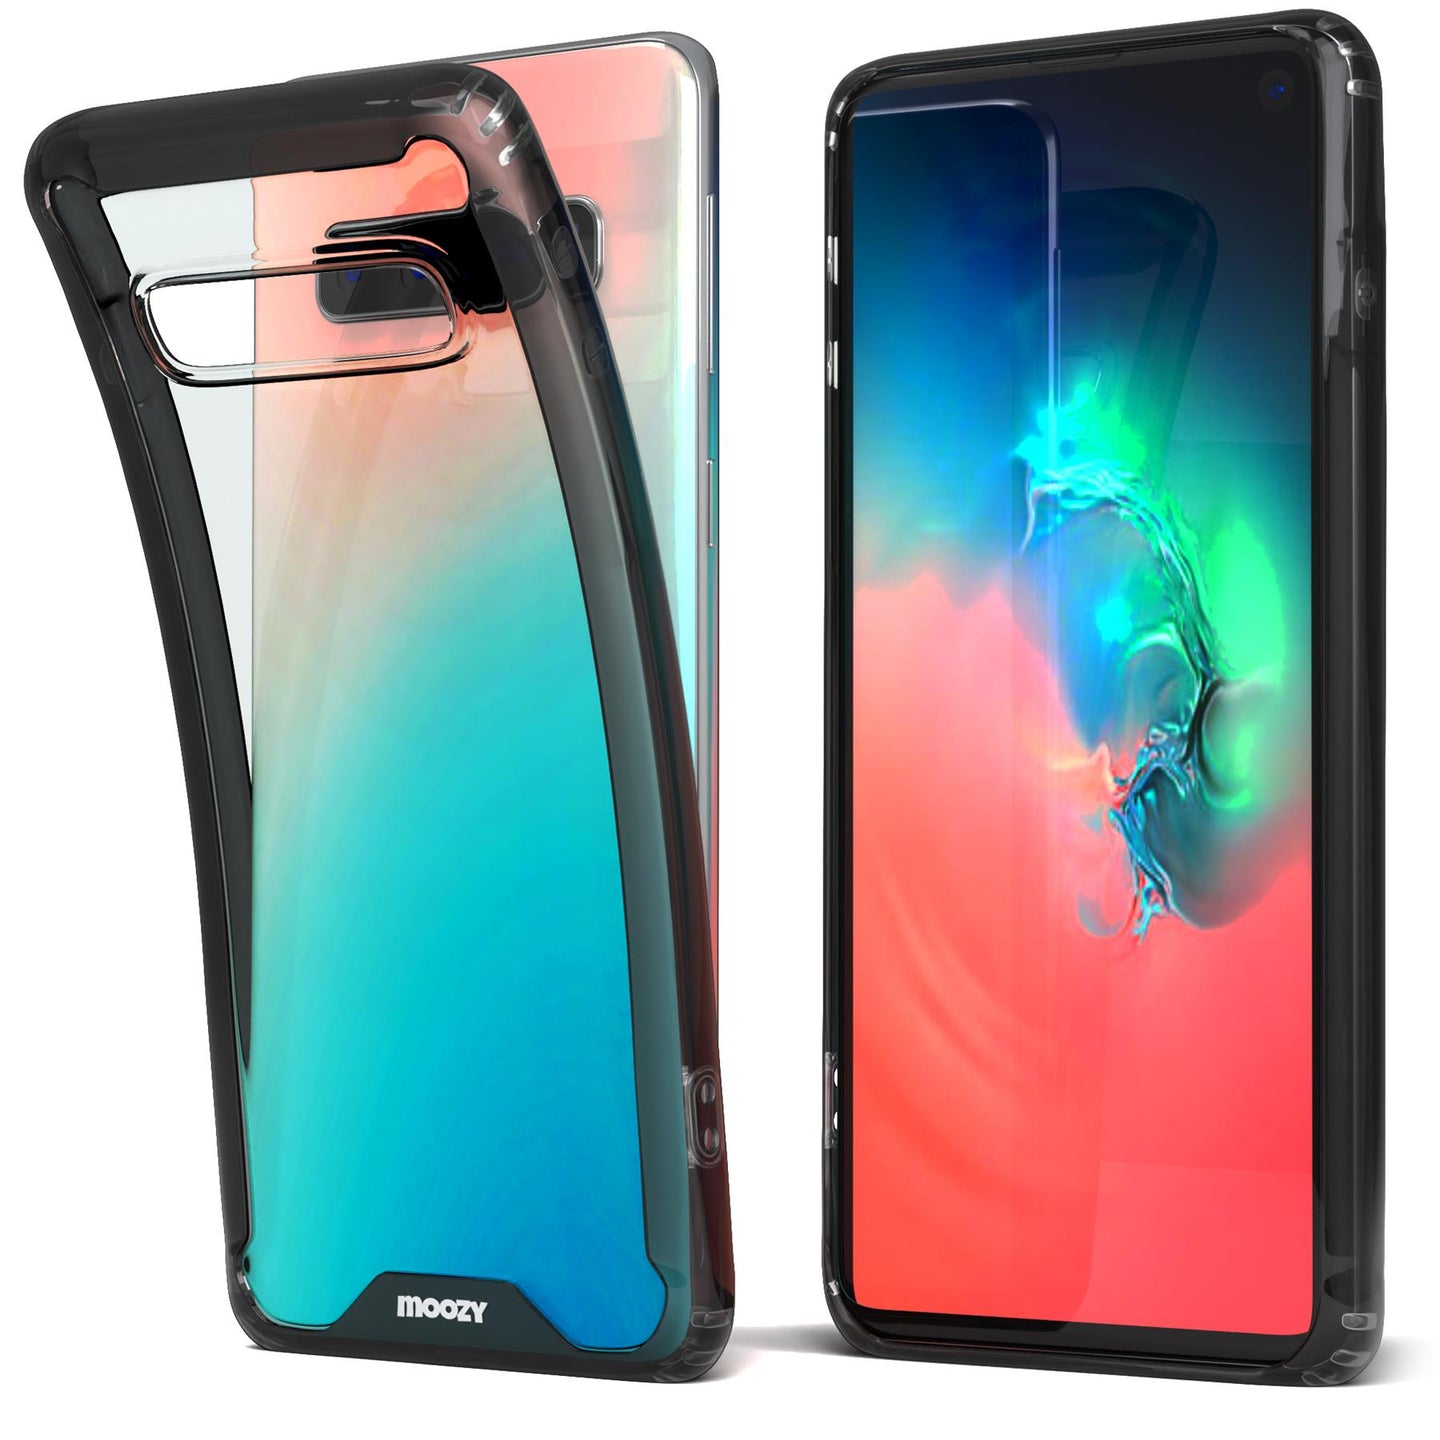 Moozy Xframe Shockproof Case for Samsung S10 - Black Rim Transparent Case, Double Colour Clear Hybrid Cover with Shock Absorbing TPU Rim